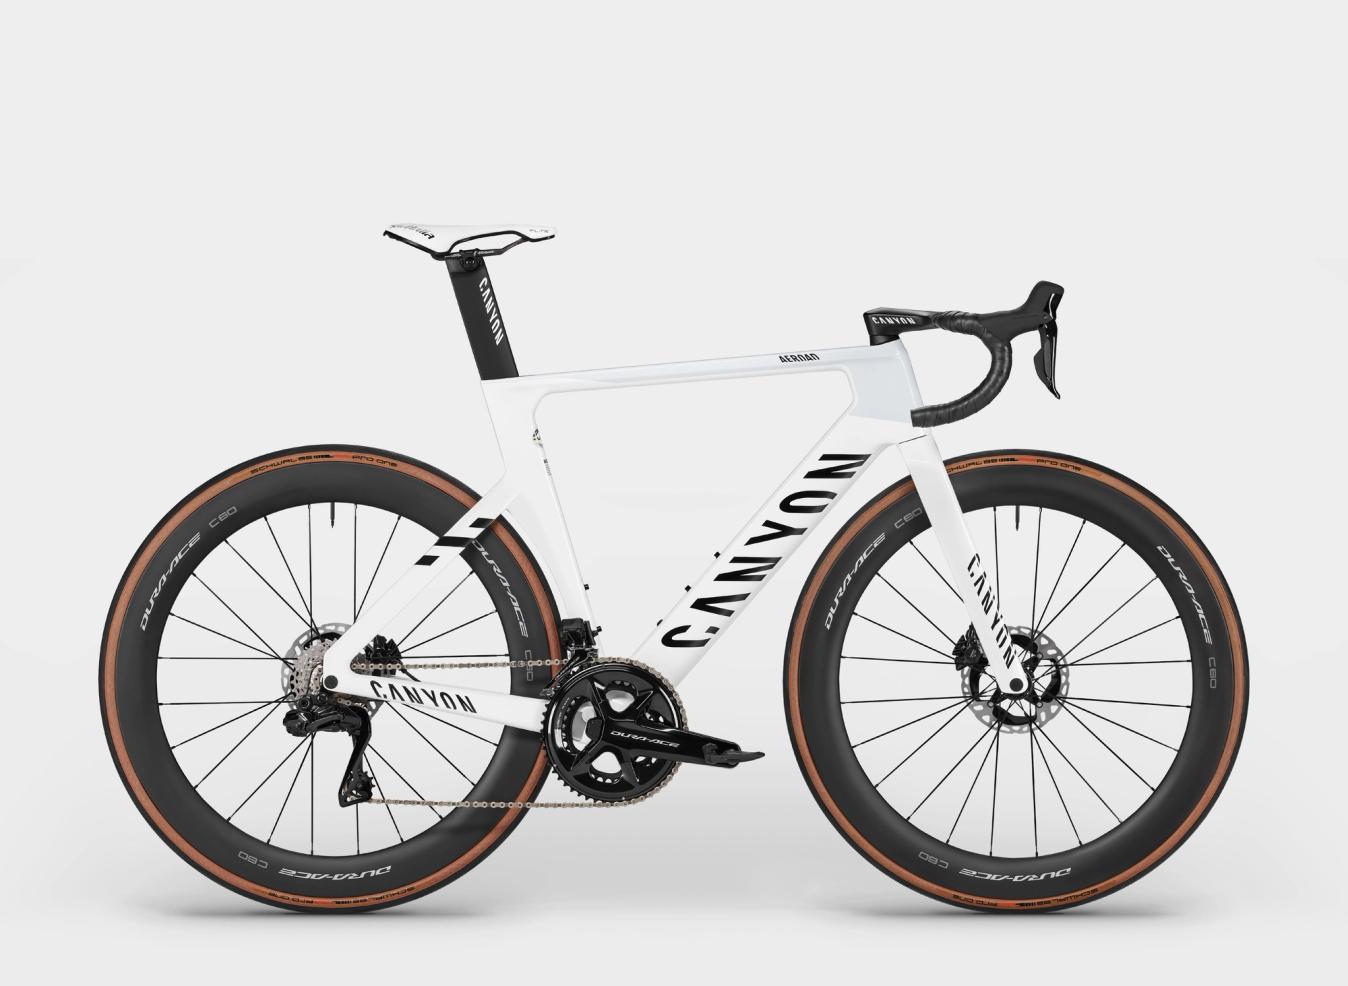 The Canyon Aeroad CFR MVDP is “optimised for all-out performance”.